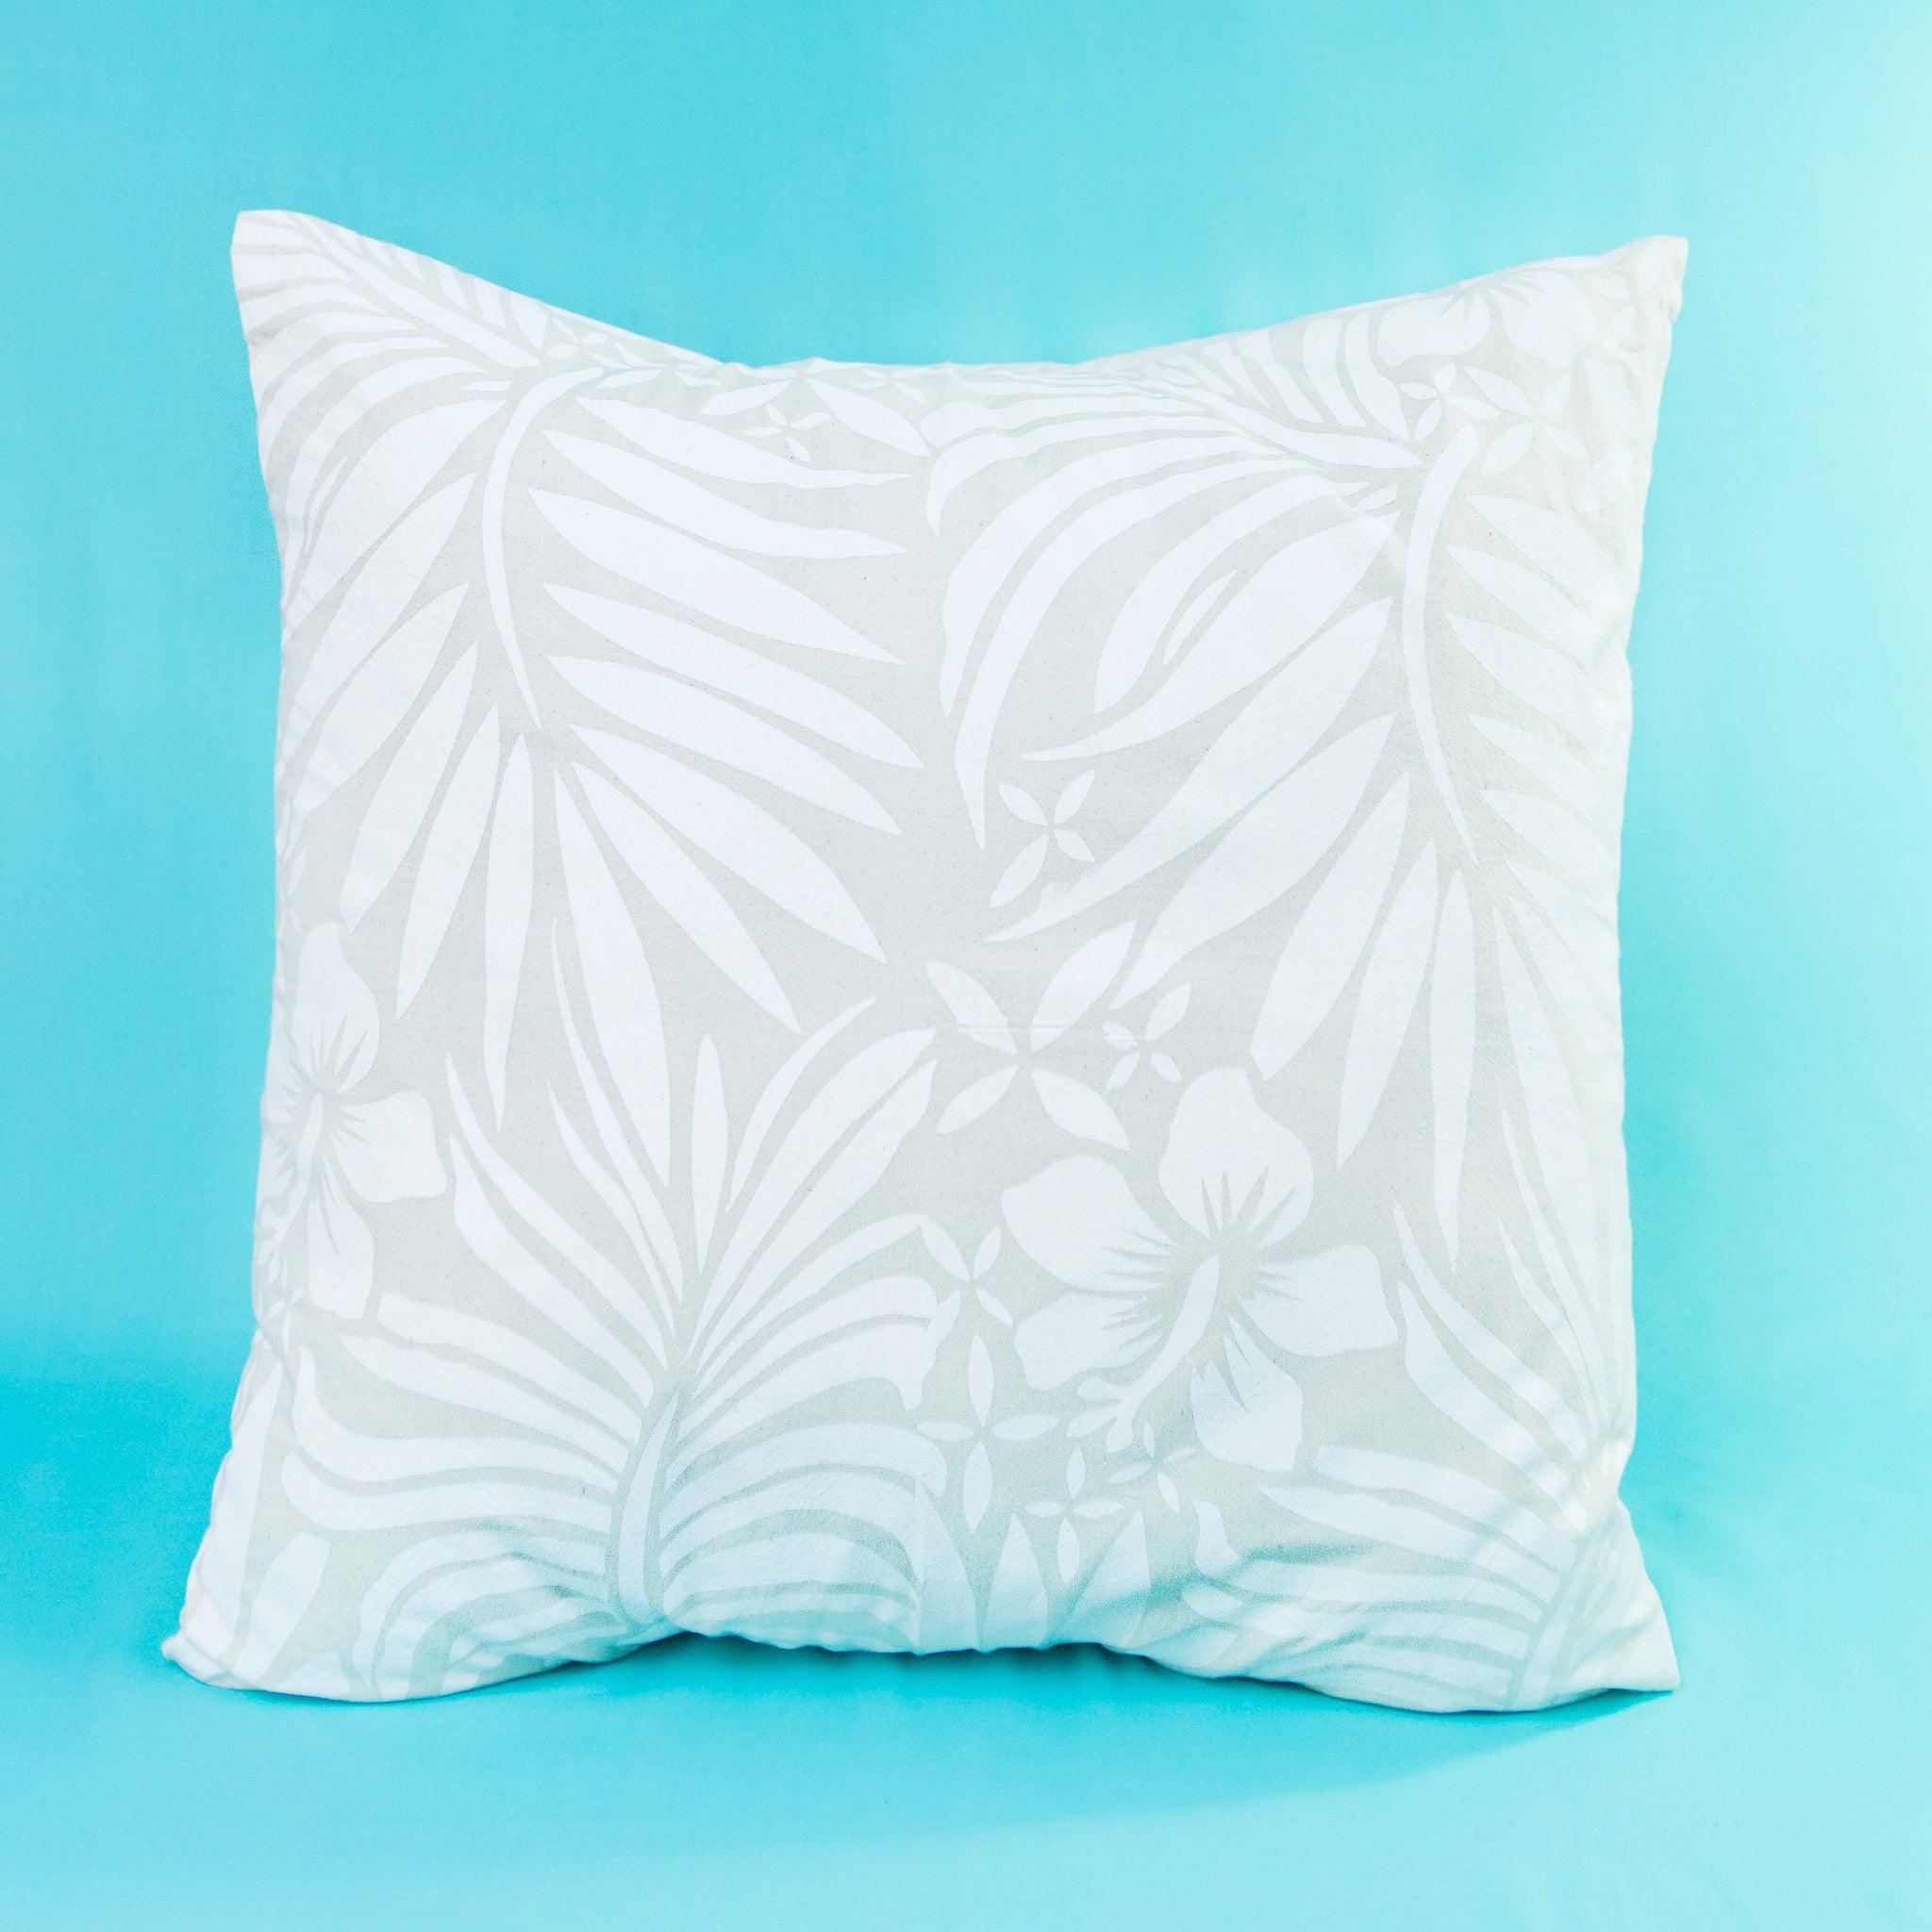 Cushion Cover "Hibiscus & Leaves"